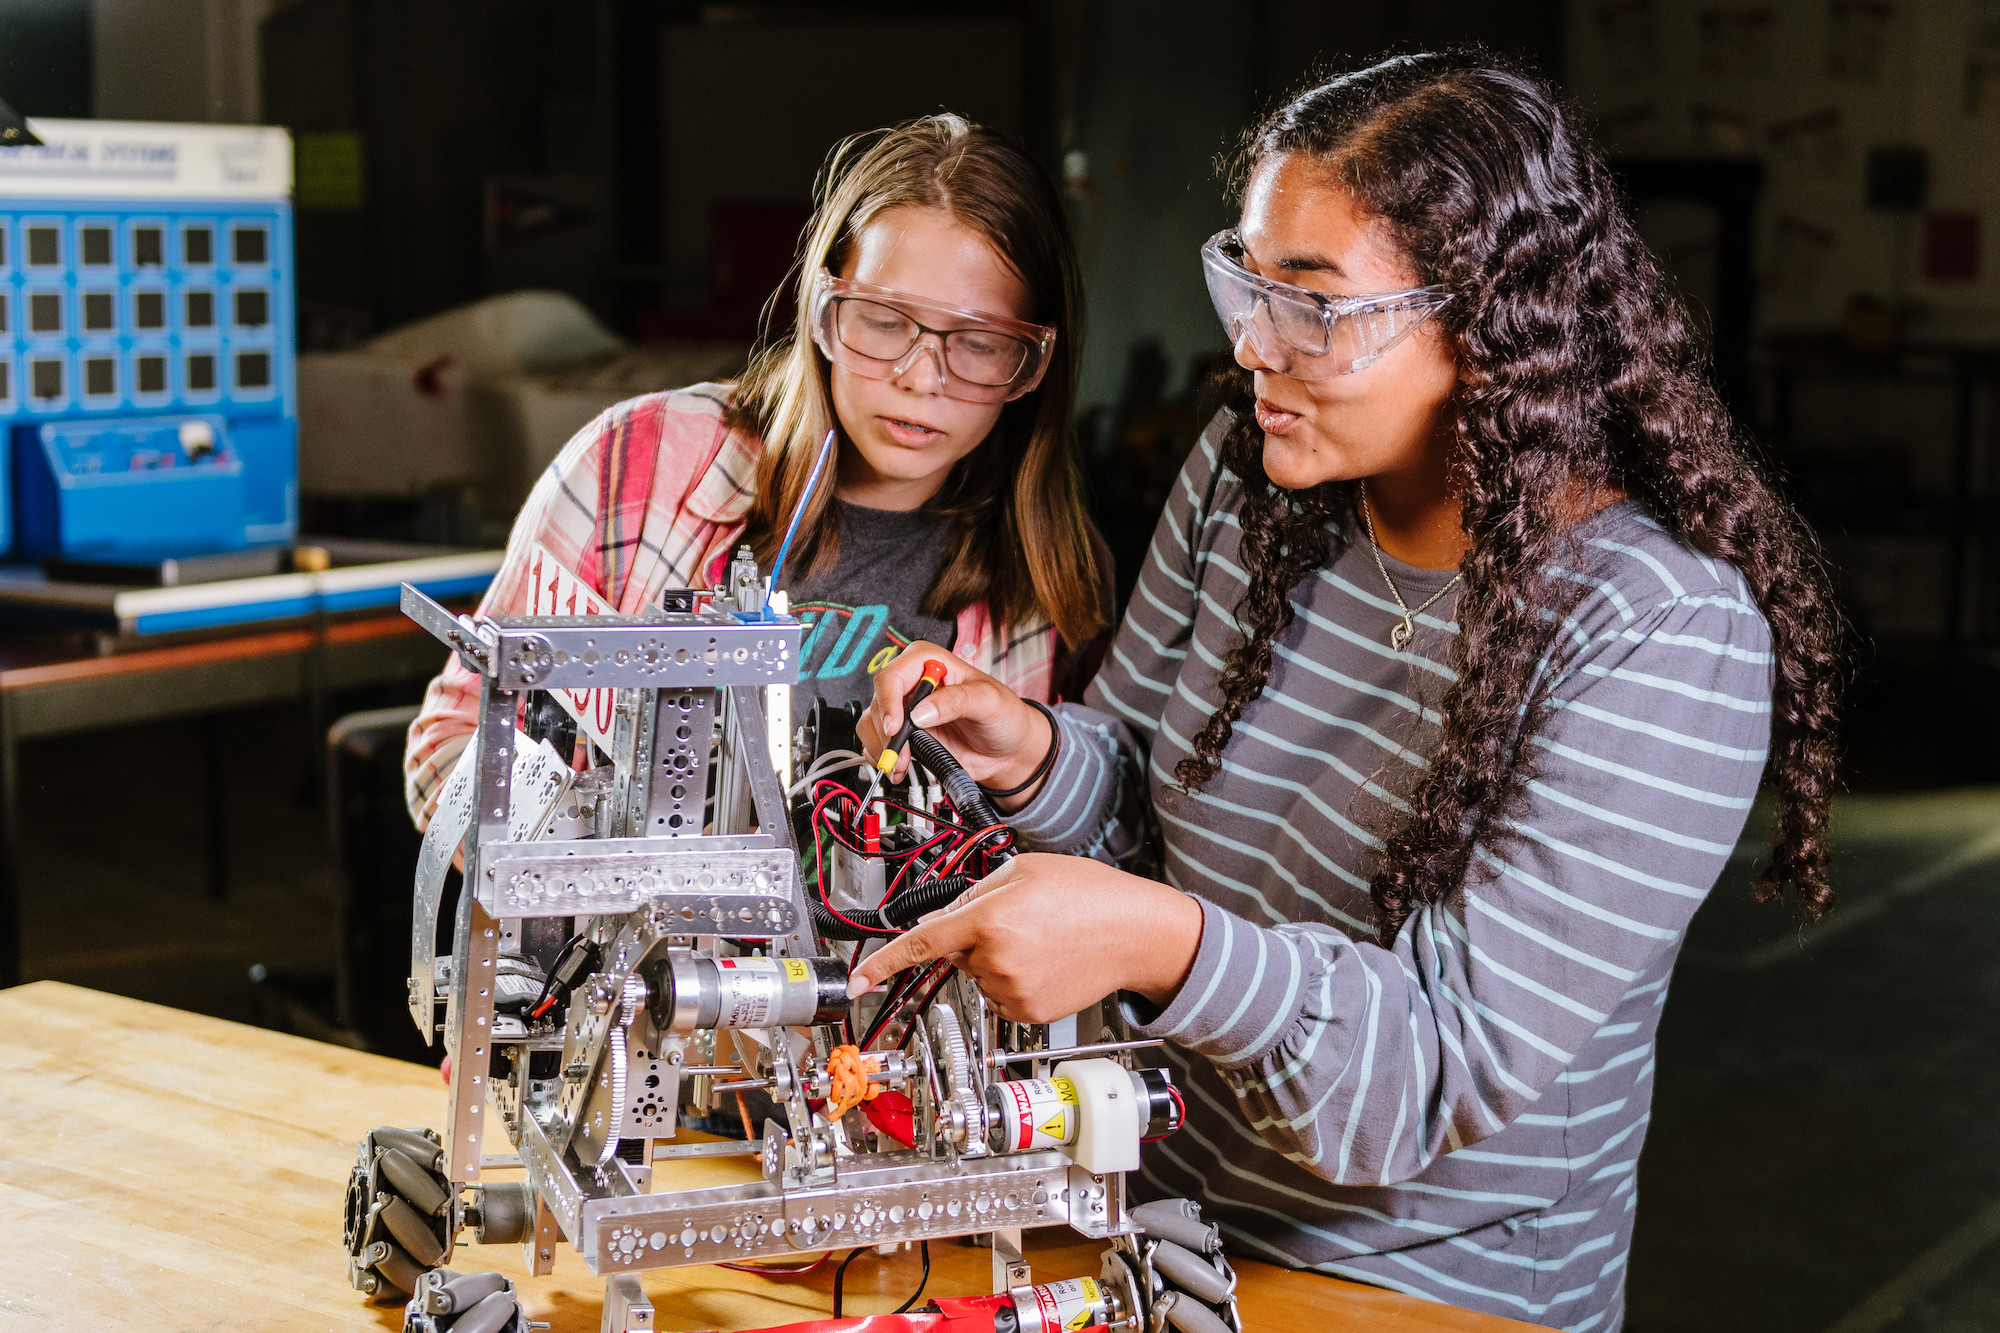 Two girl engineering students building a project